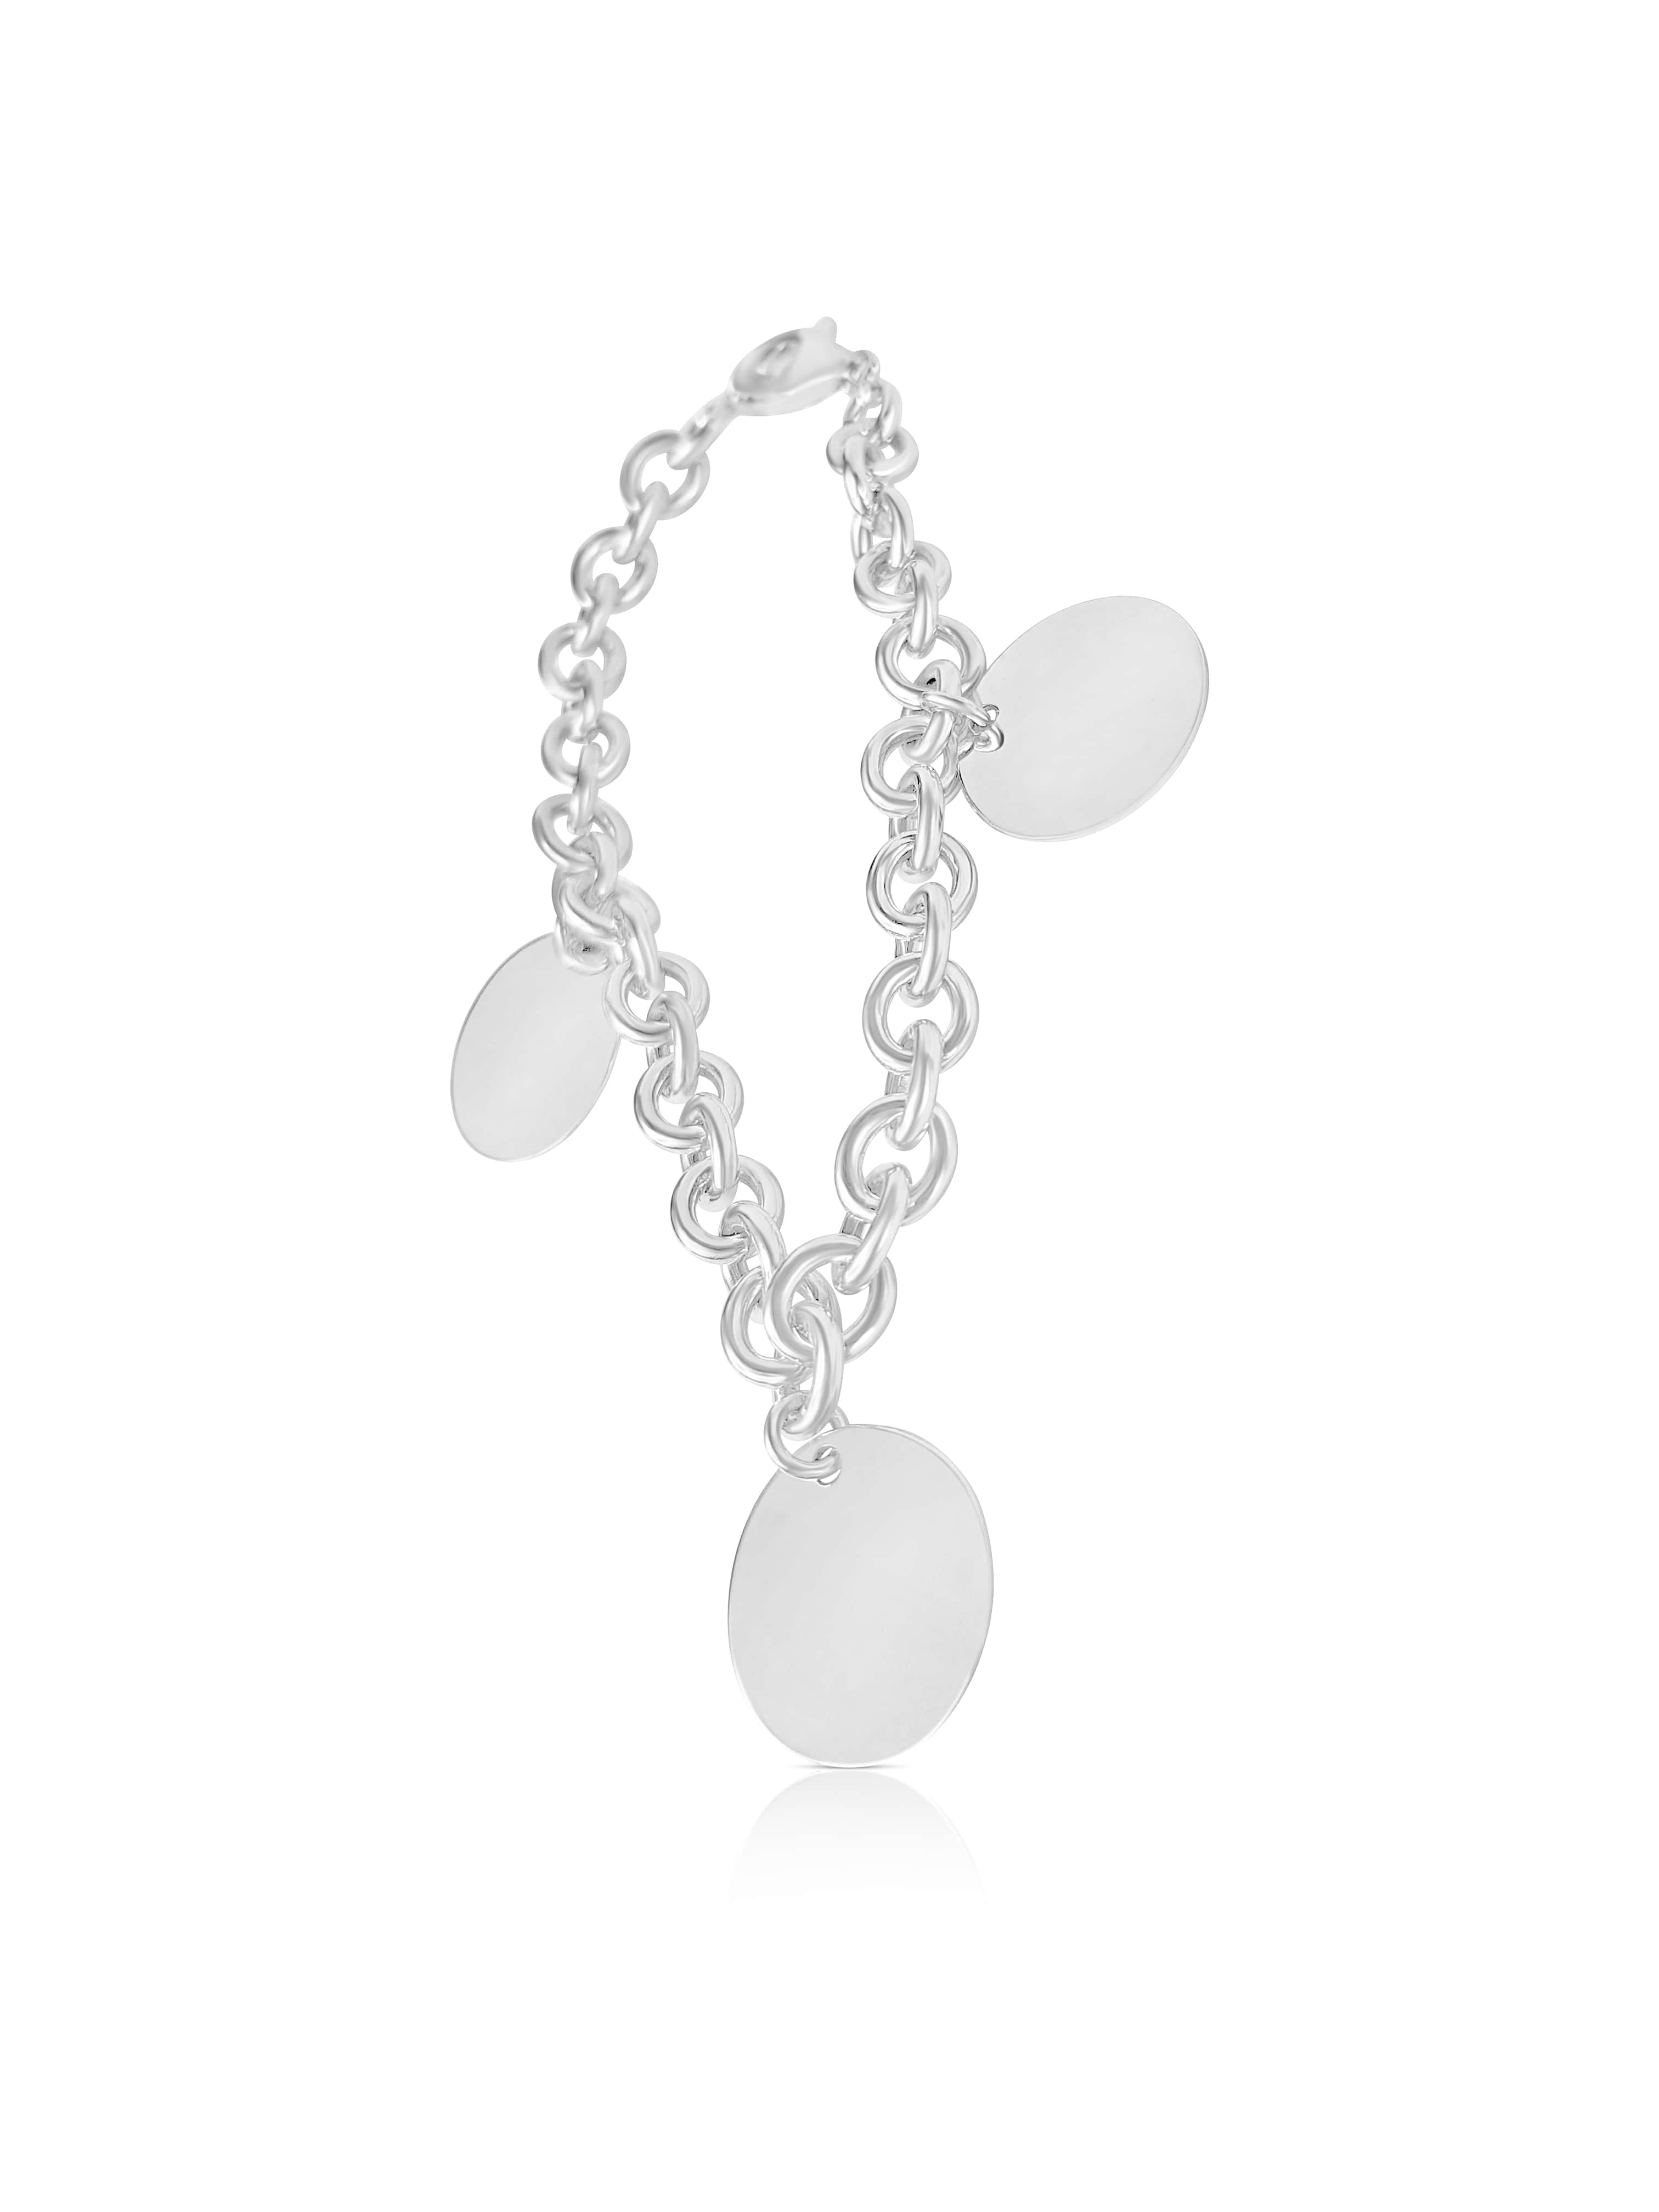 sterling silver chain bracelet with engravable disc - Or Jewellers